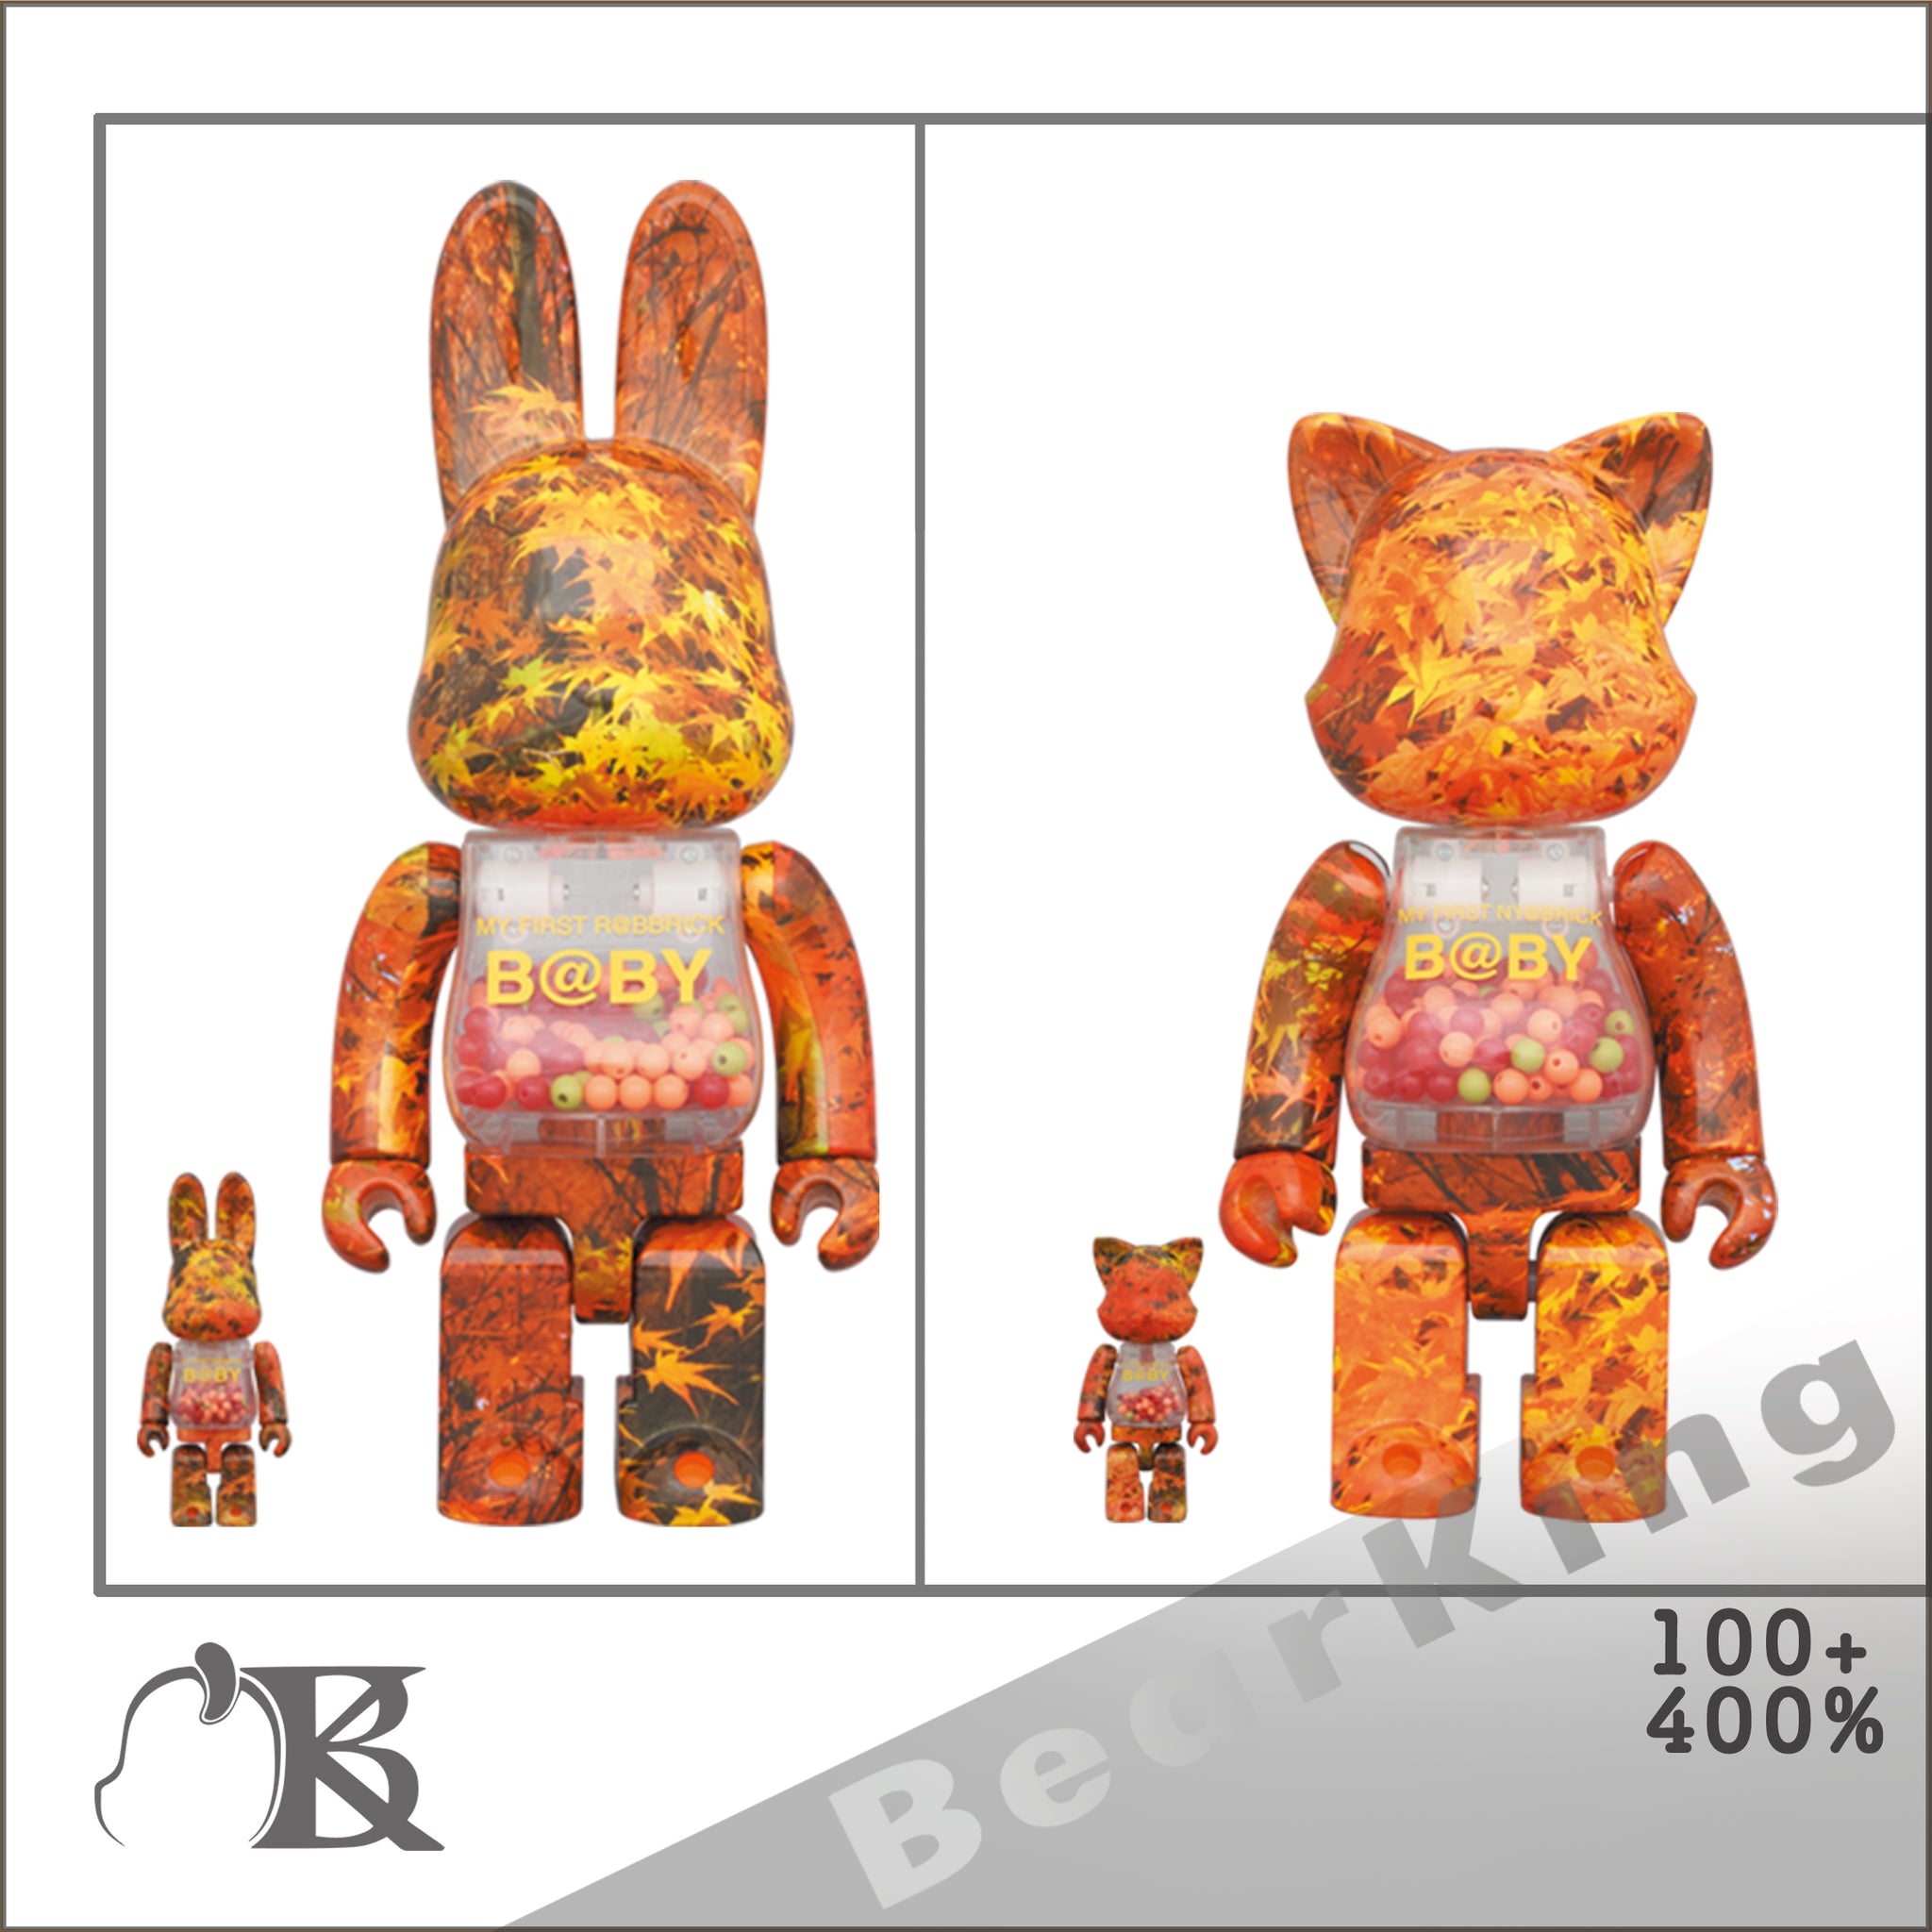 MY FIRST NY@BRICK & R@BBRICK B@BY 100％ & 400％ AUTUMN LEAVES Ver. SET of 2